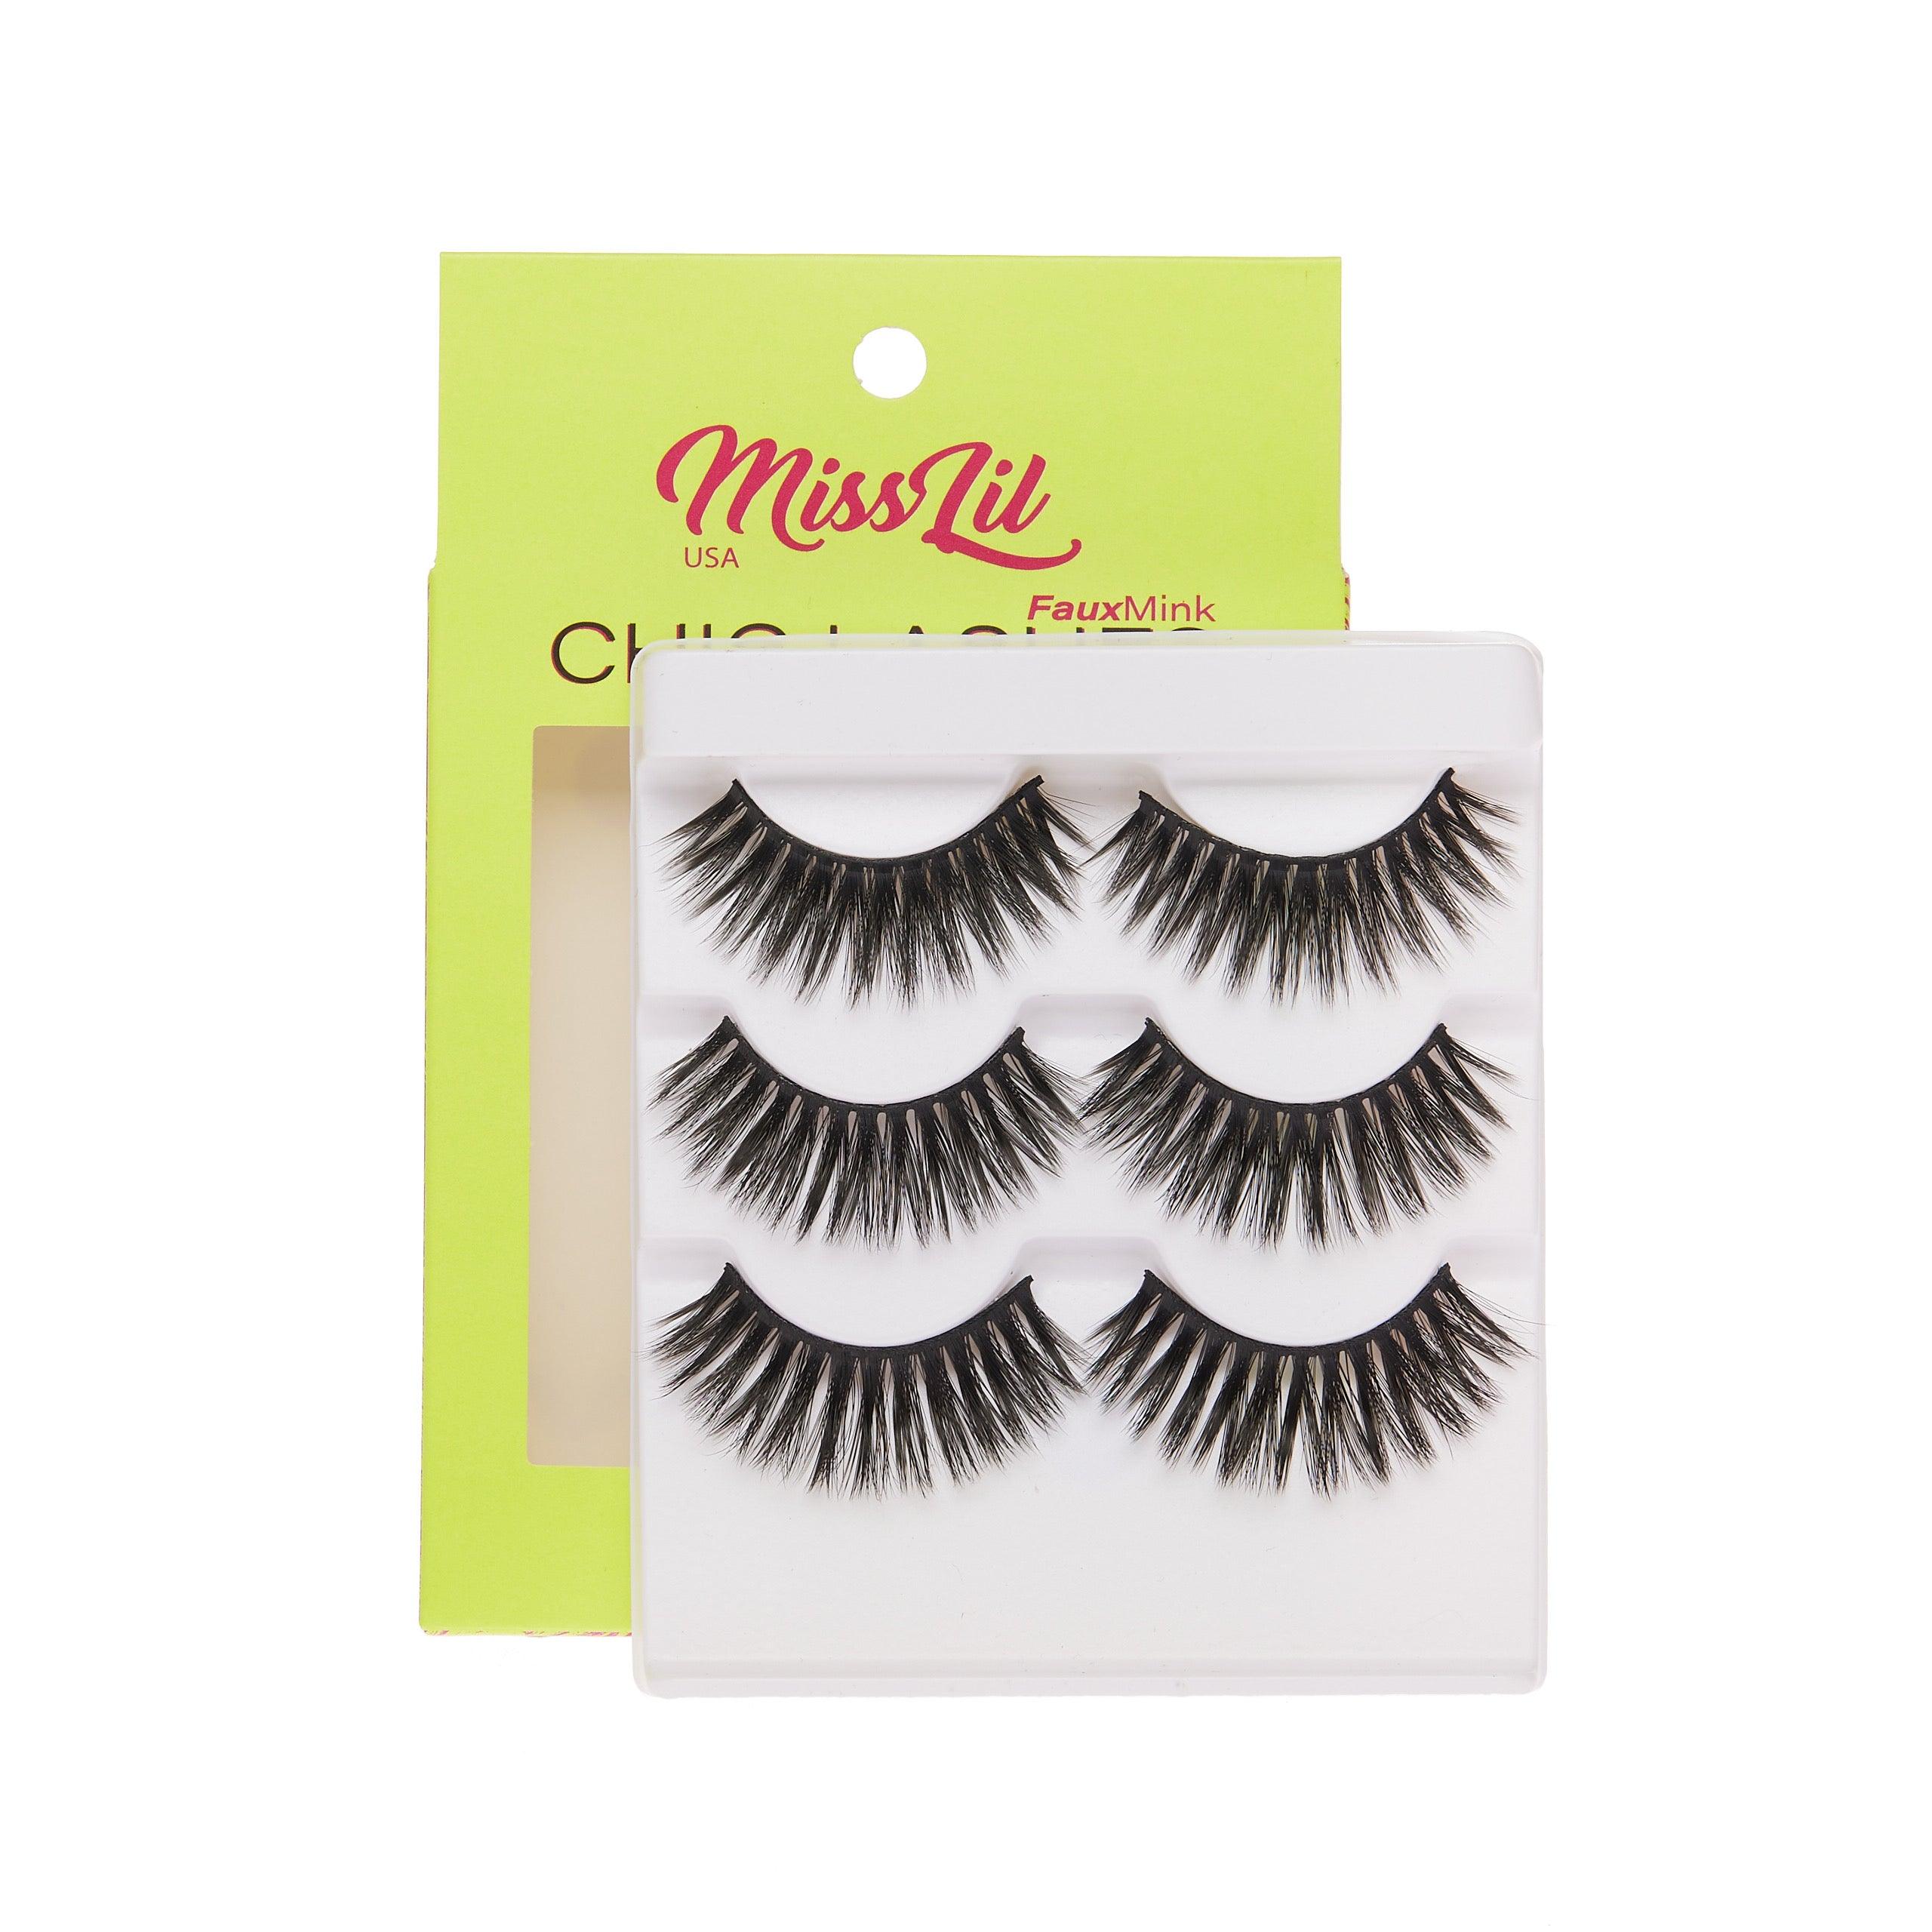 3-Pair Faux Mink Eyelashes - Chic Lashes Collection #21 - Pack of 3 - Miss Lil USA